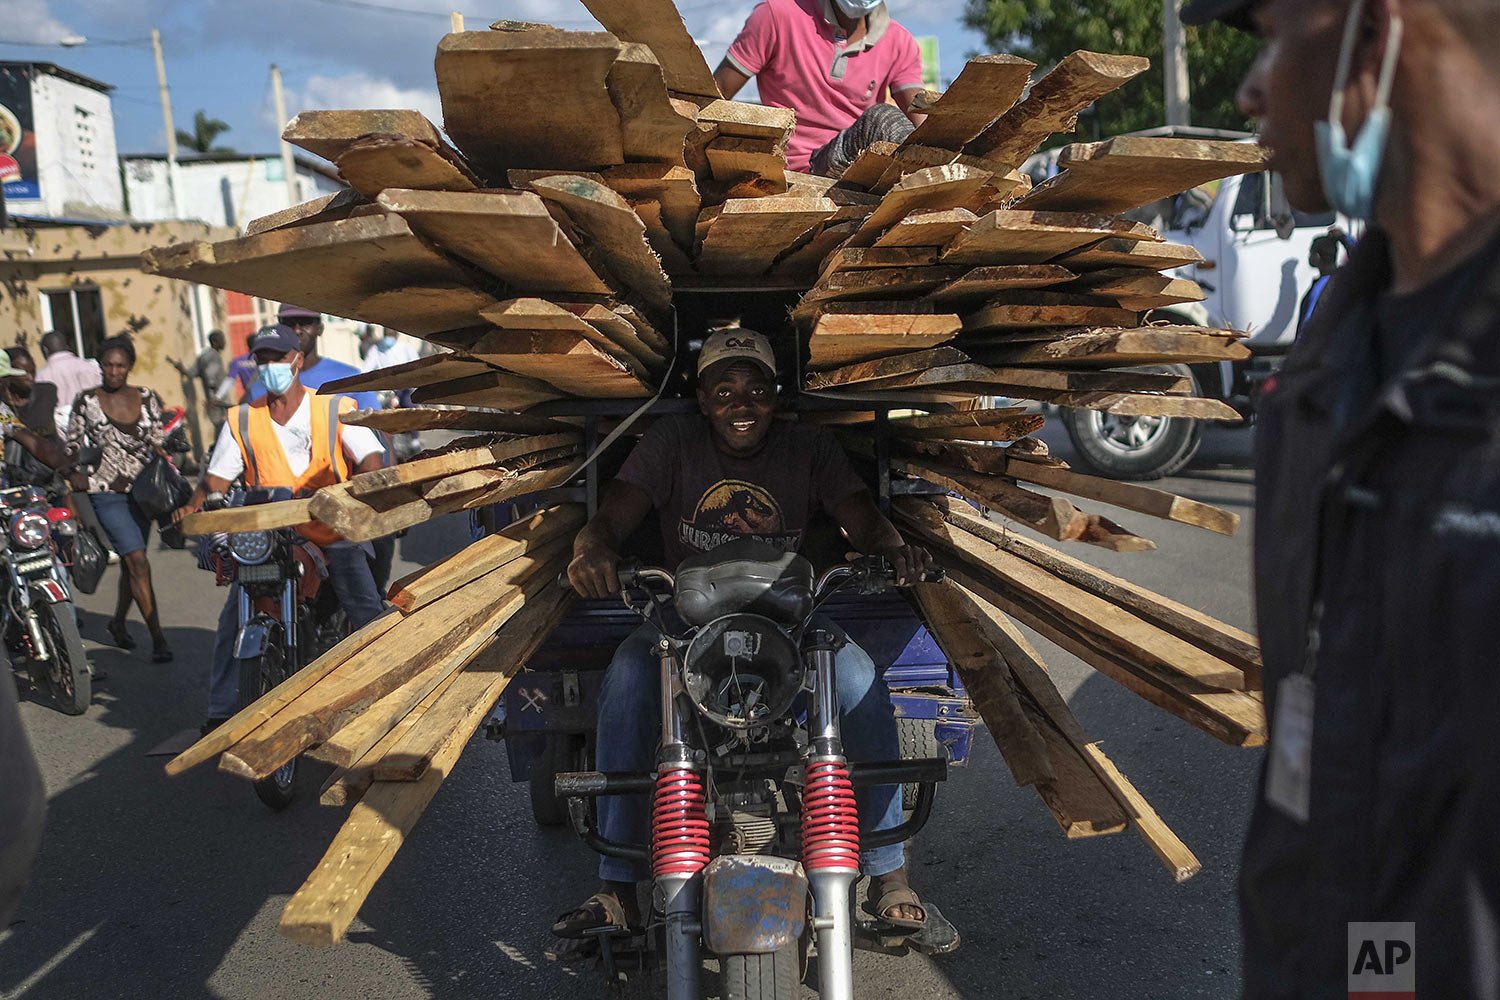  A man returns to Haiti after buying pieces of wood at a market in the border town of Dajabon, Dominican Republic, Nov. 19, 2021.(AP Photo/Matias Delacroix) 